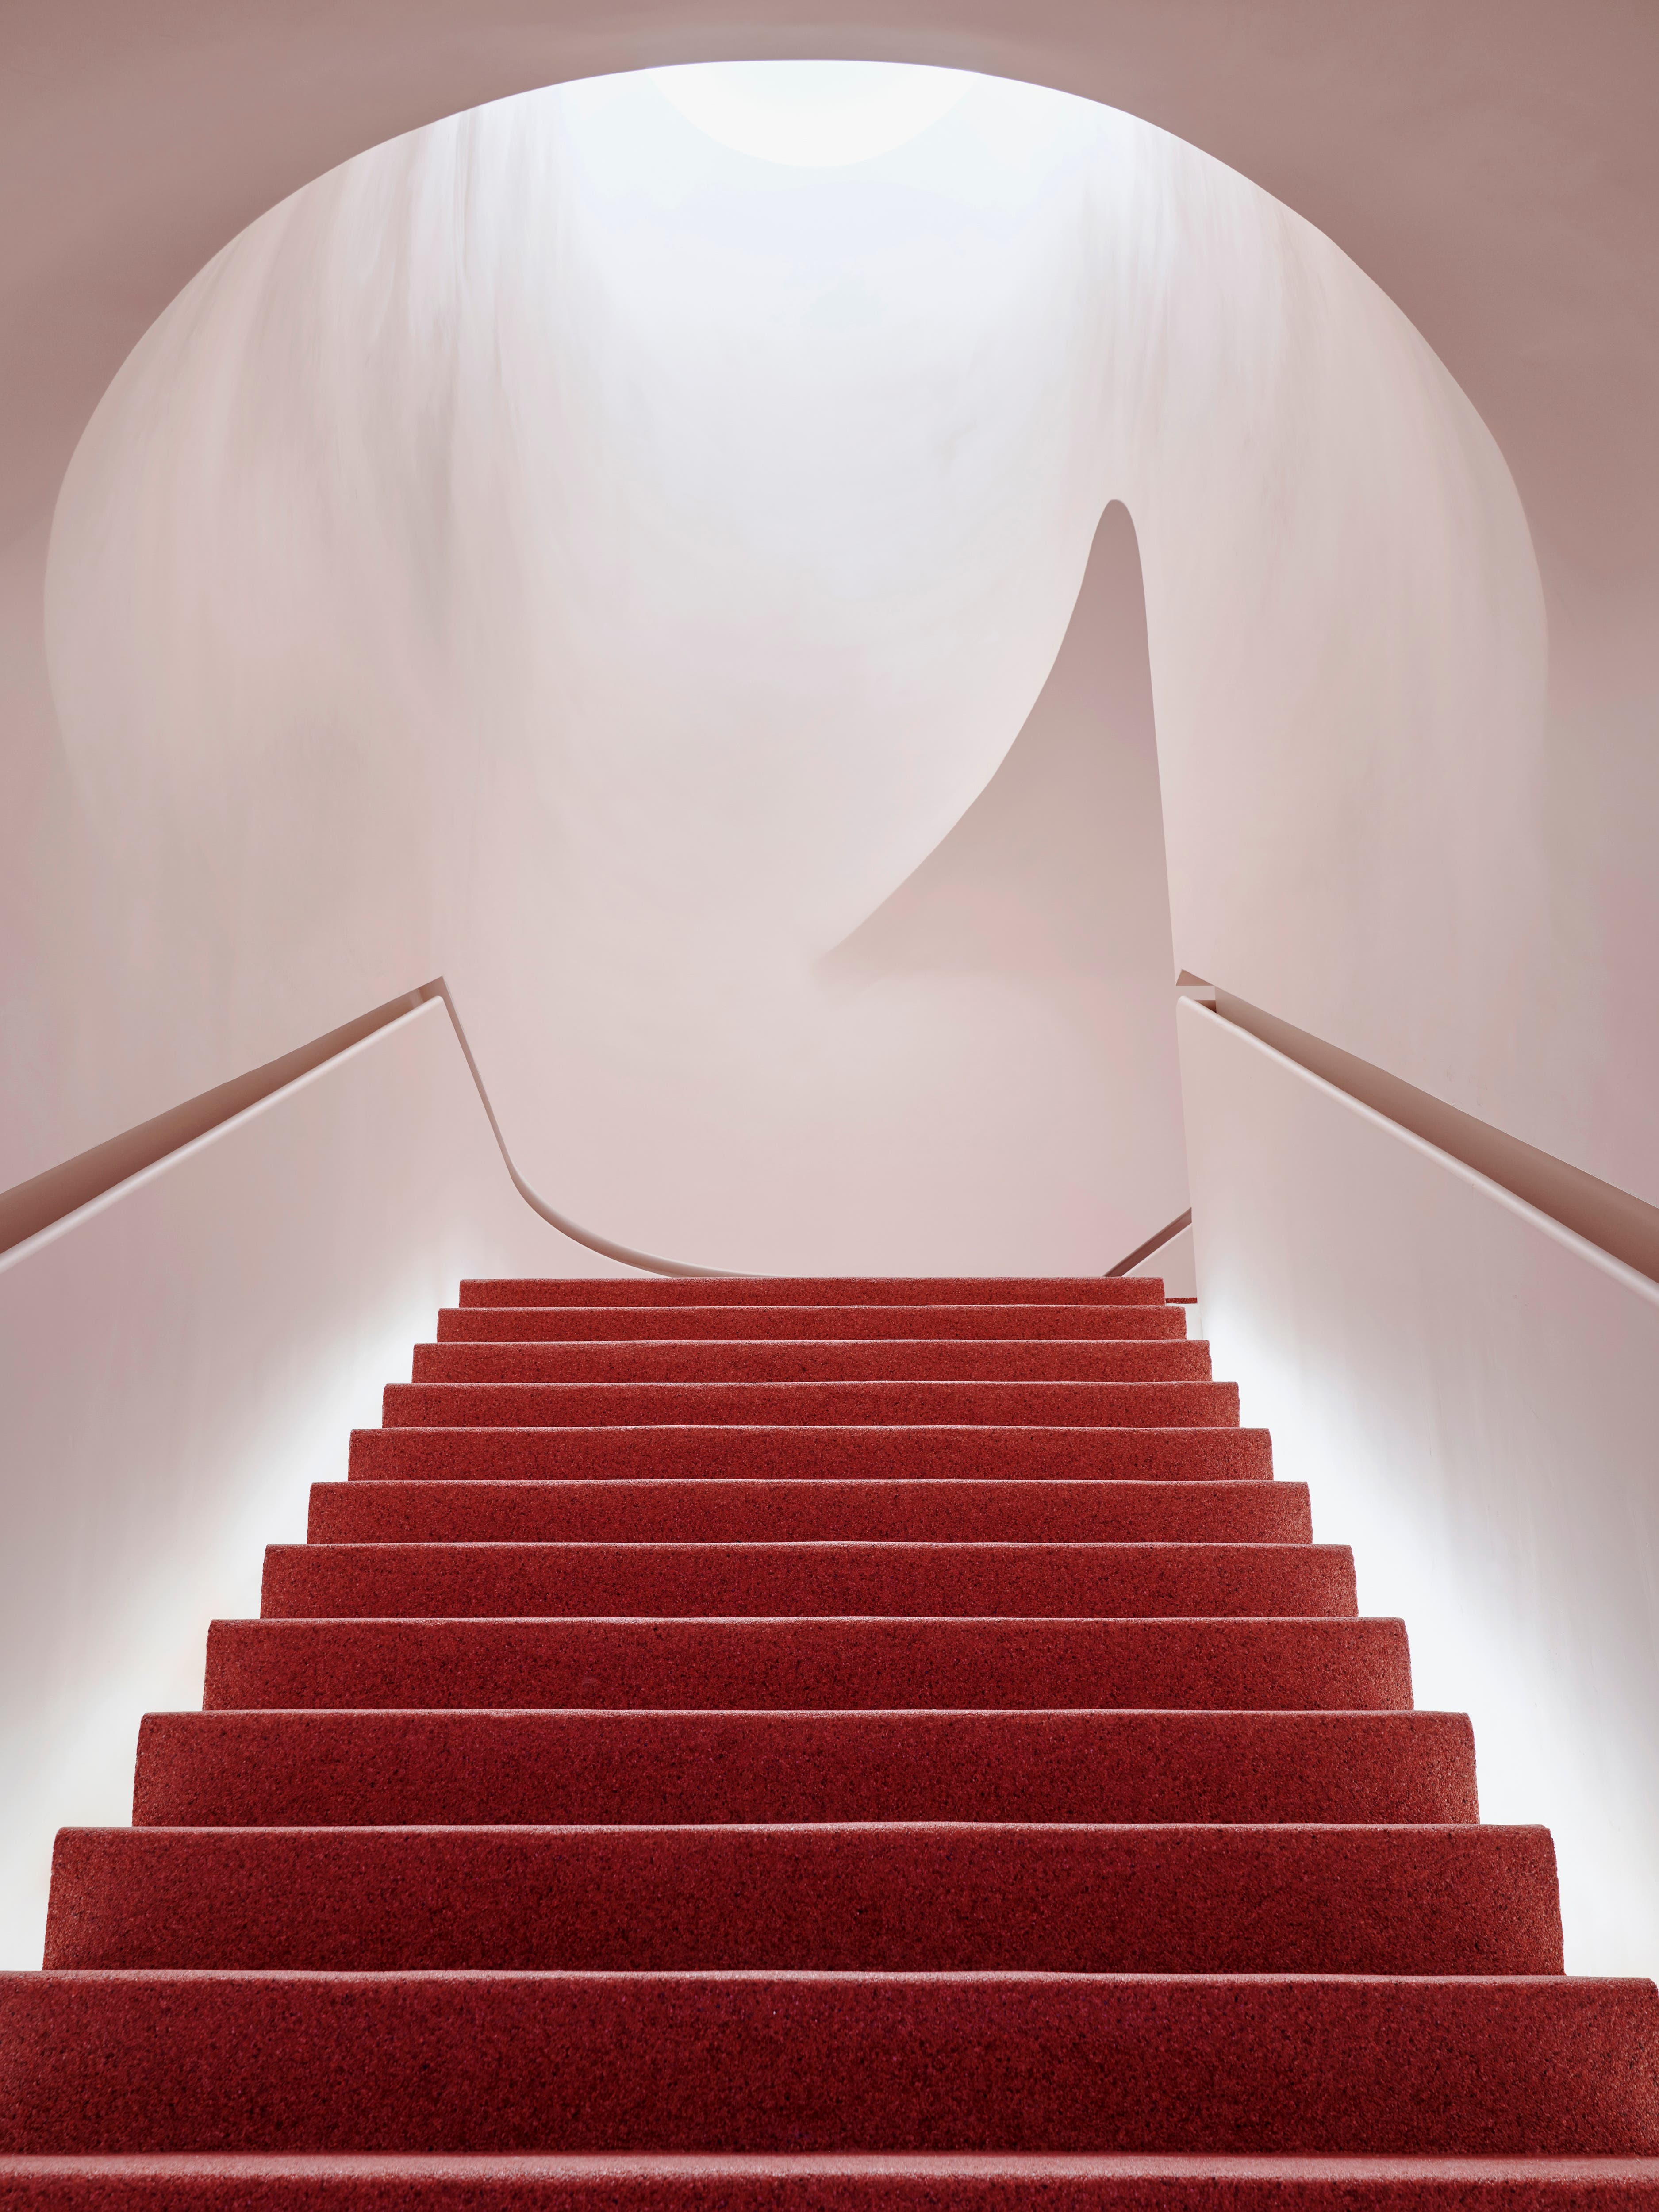 You’ll Never Guess What’s At The End Of This Stairway